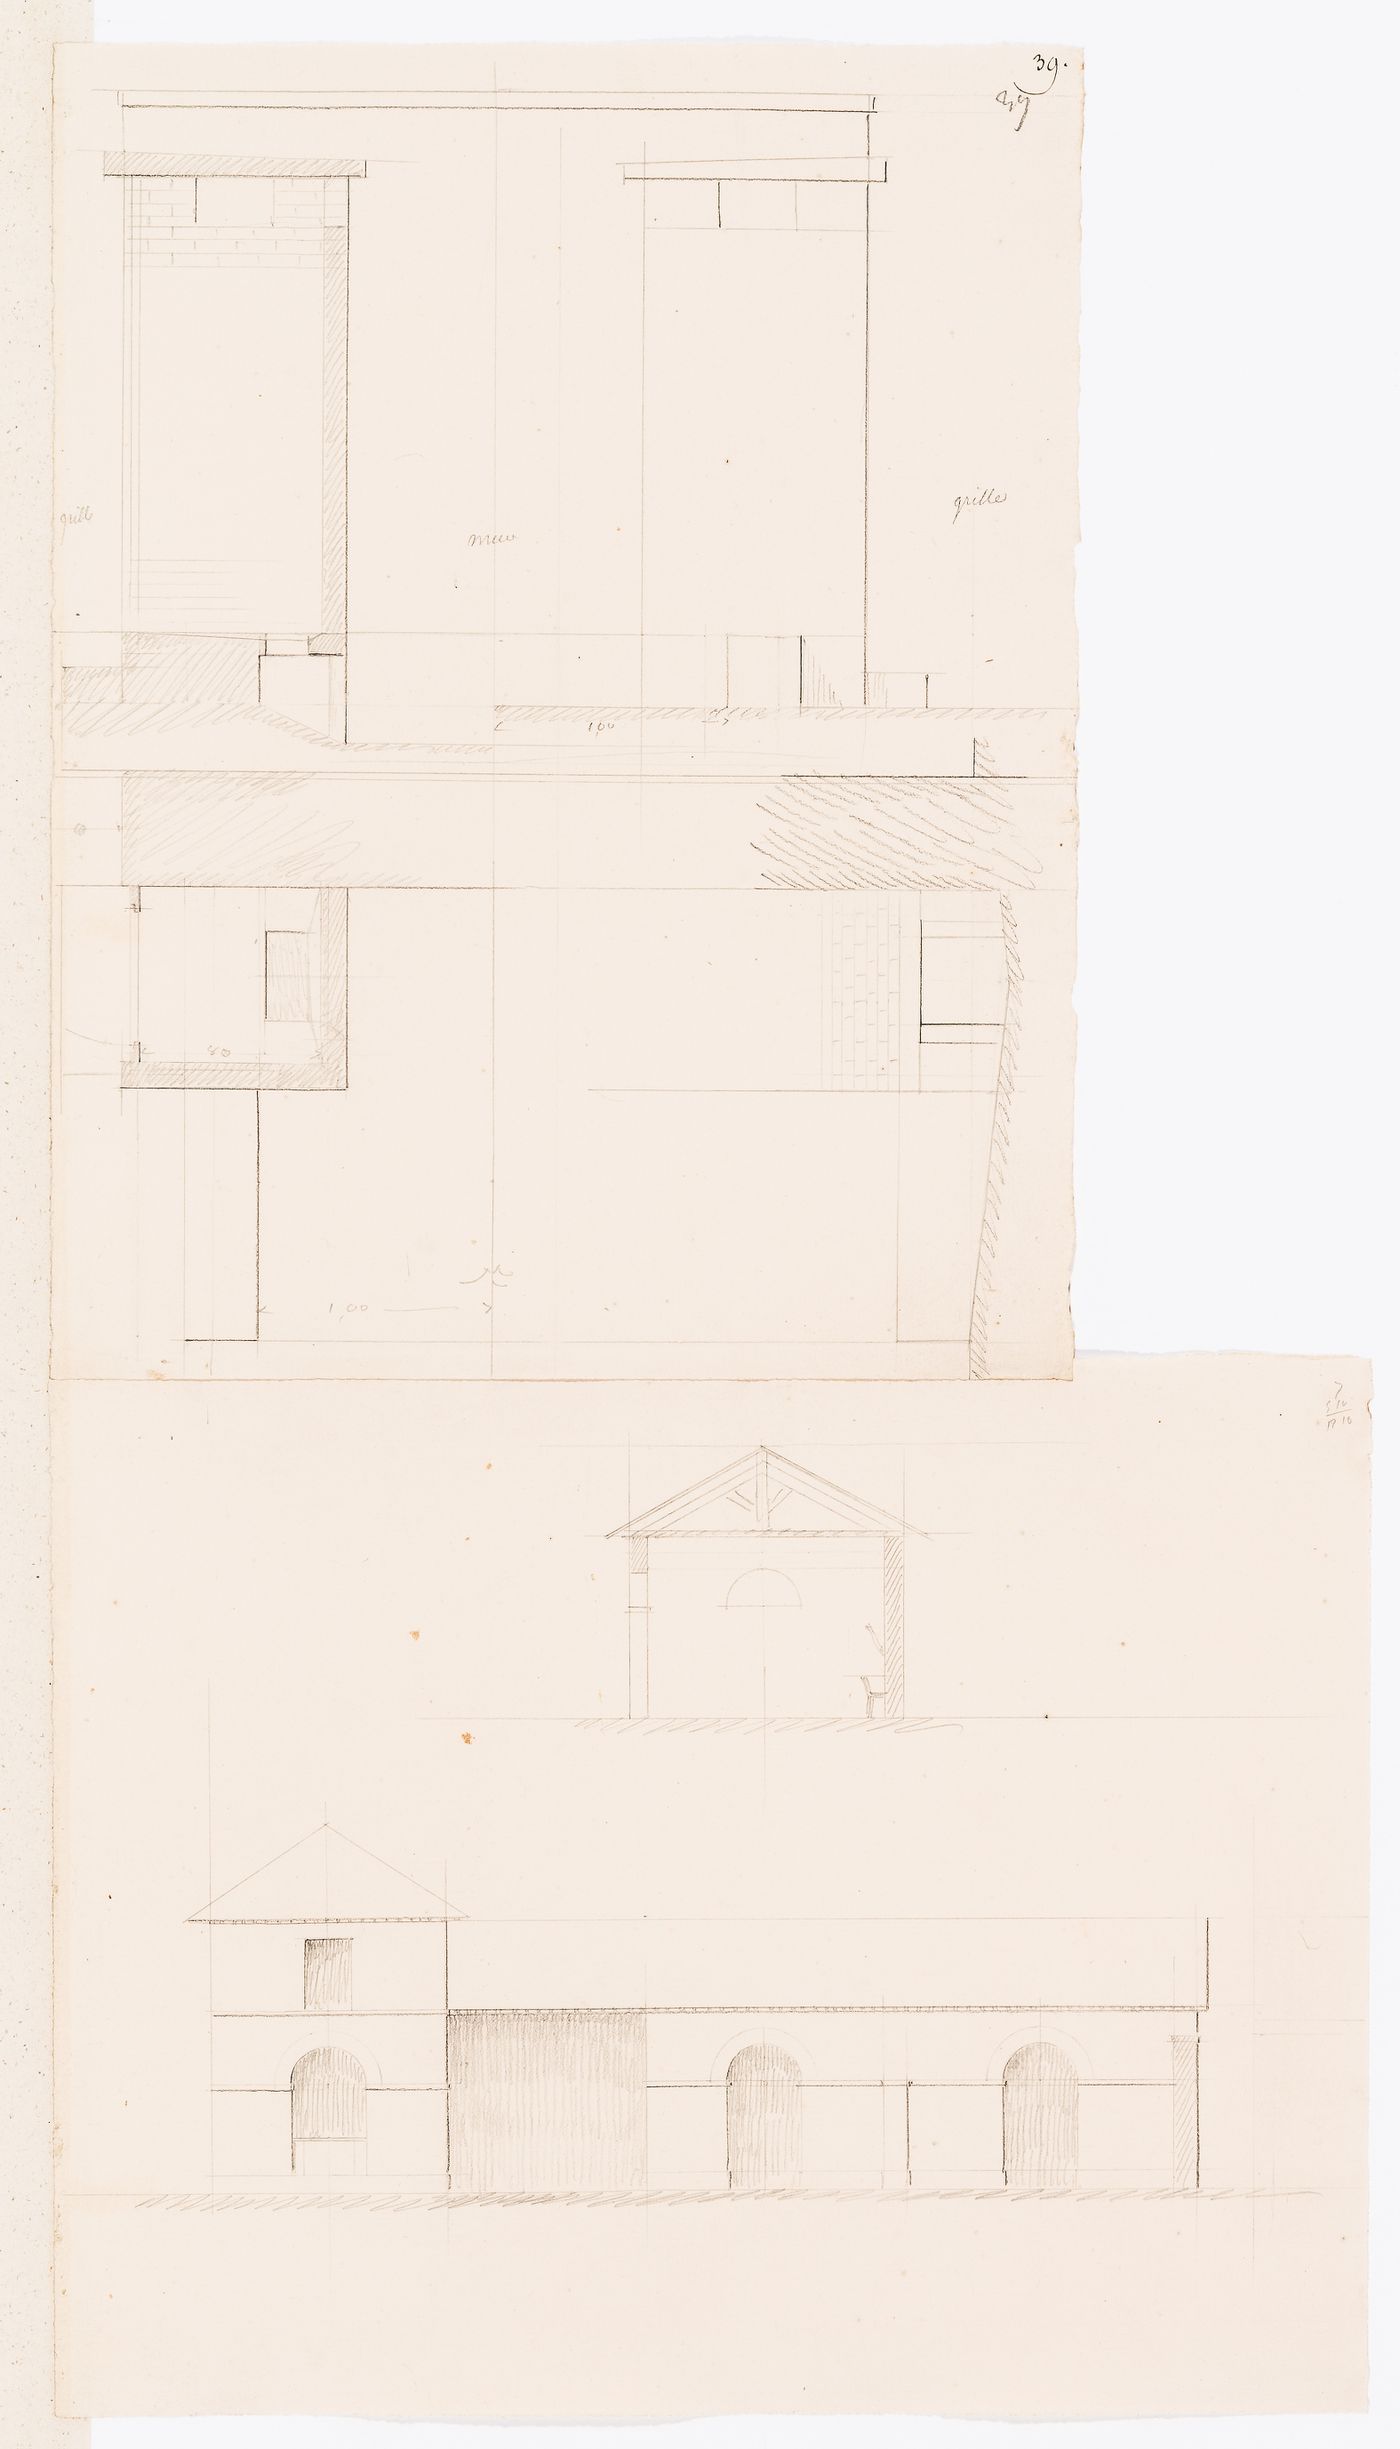 Project for a horse slaughterhouse, Plaine de Grenelle: Plans and elevations for a "grille"